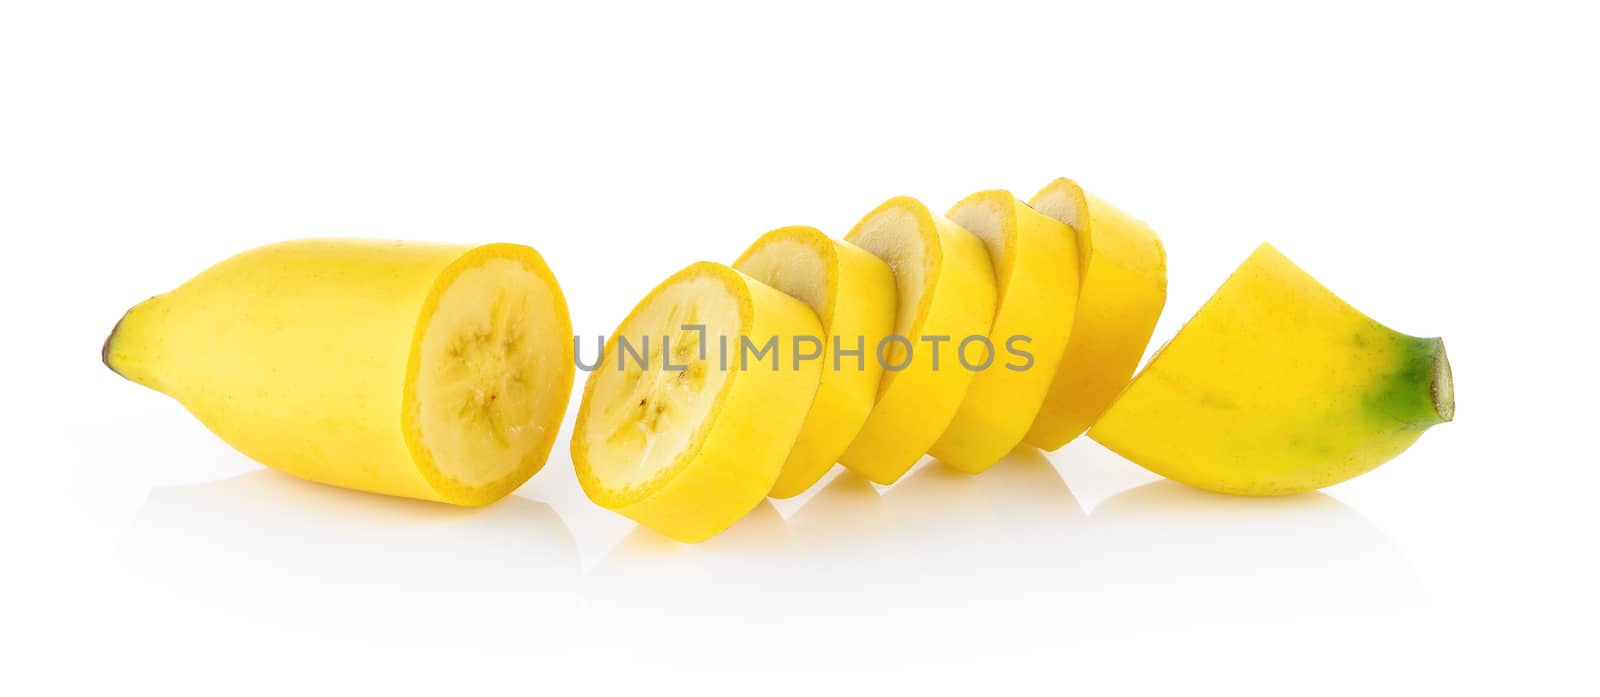 bananas isolated on the white background by sommai